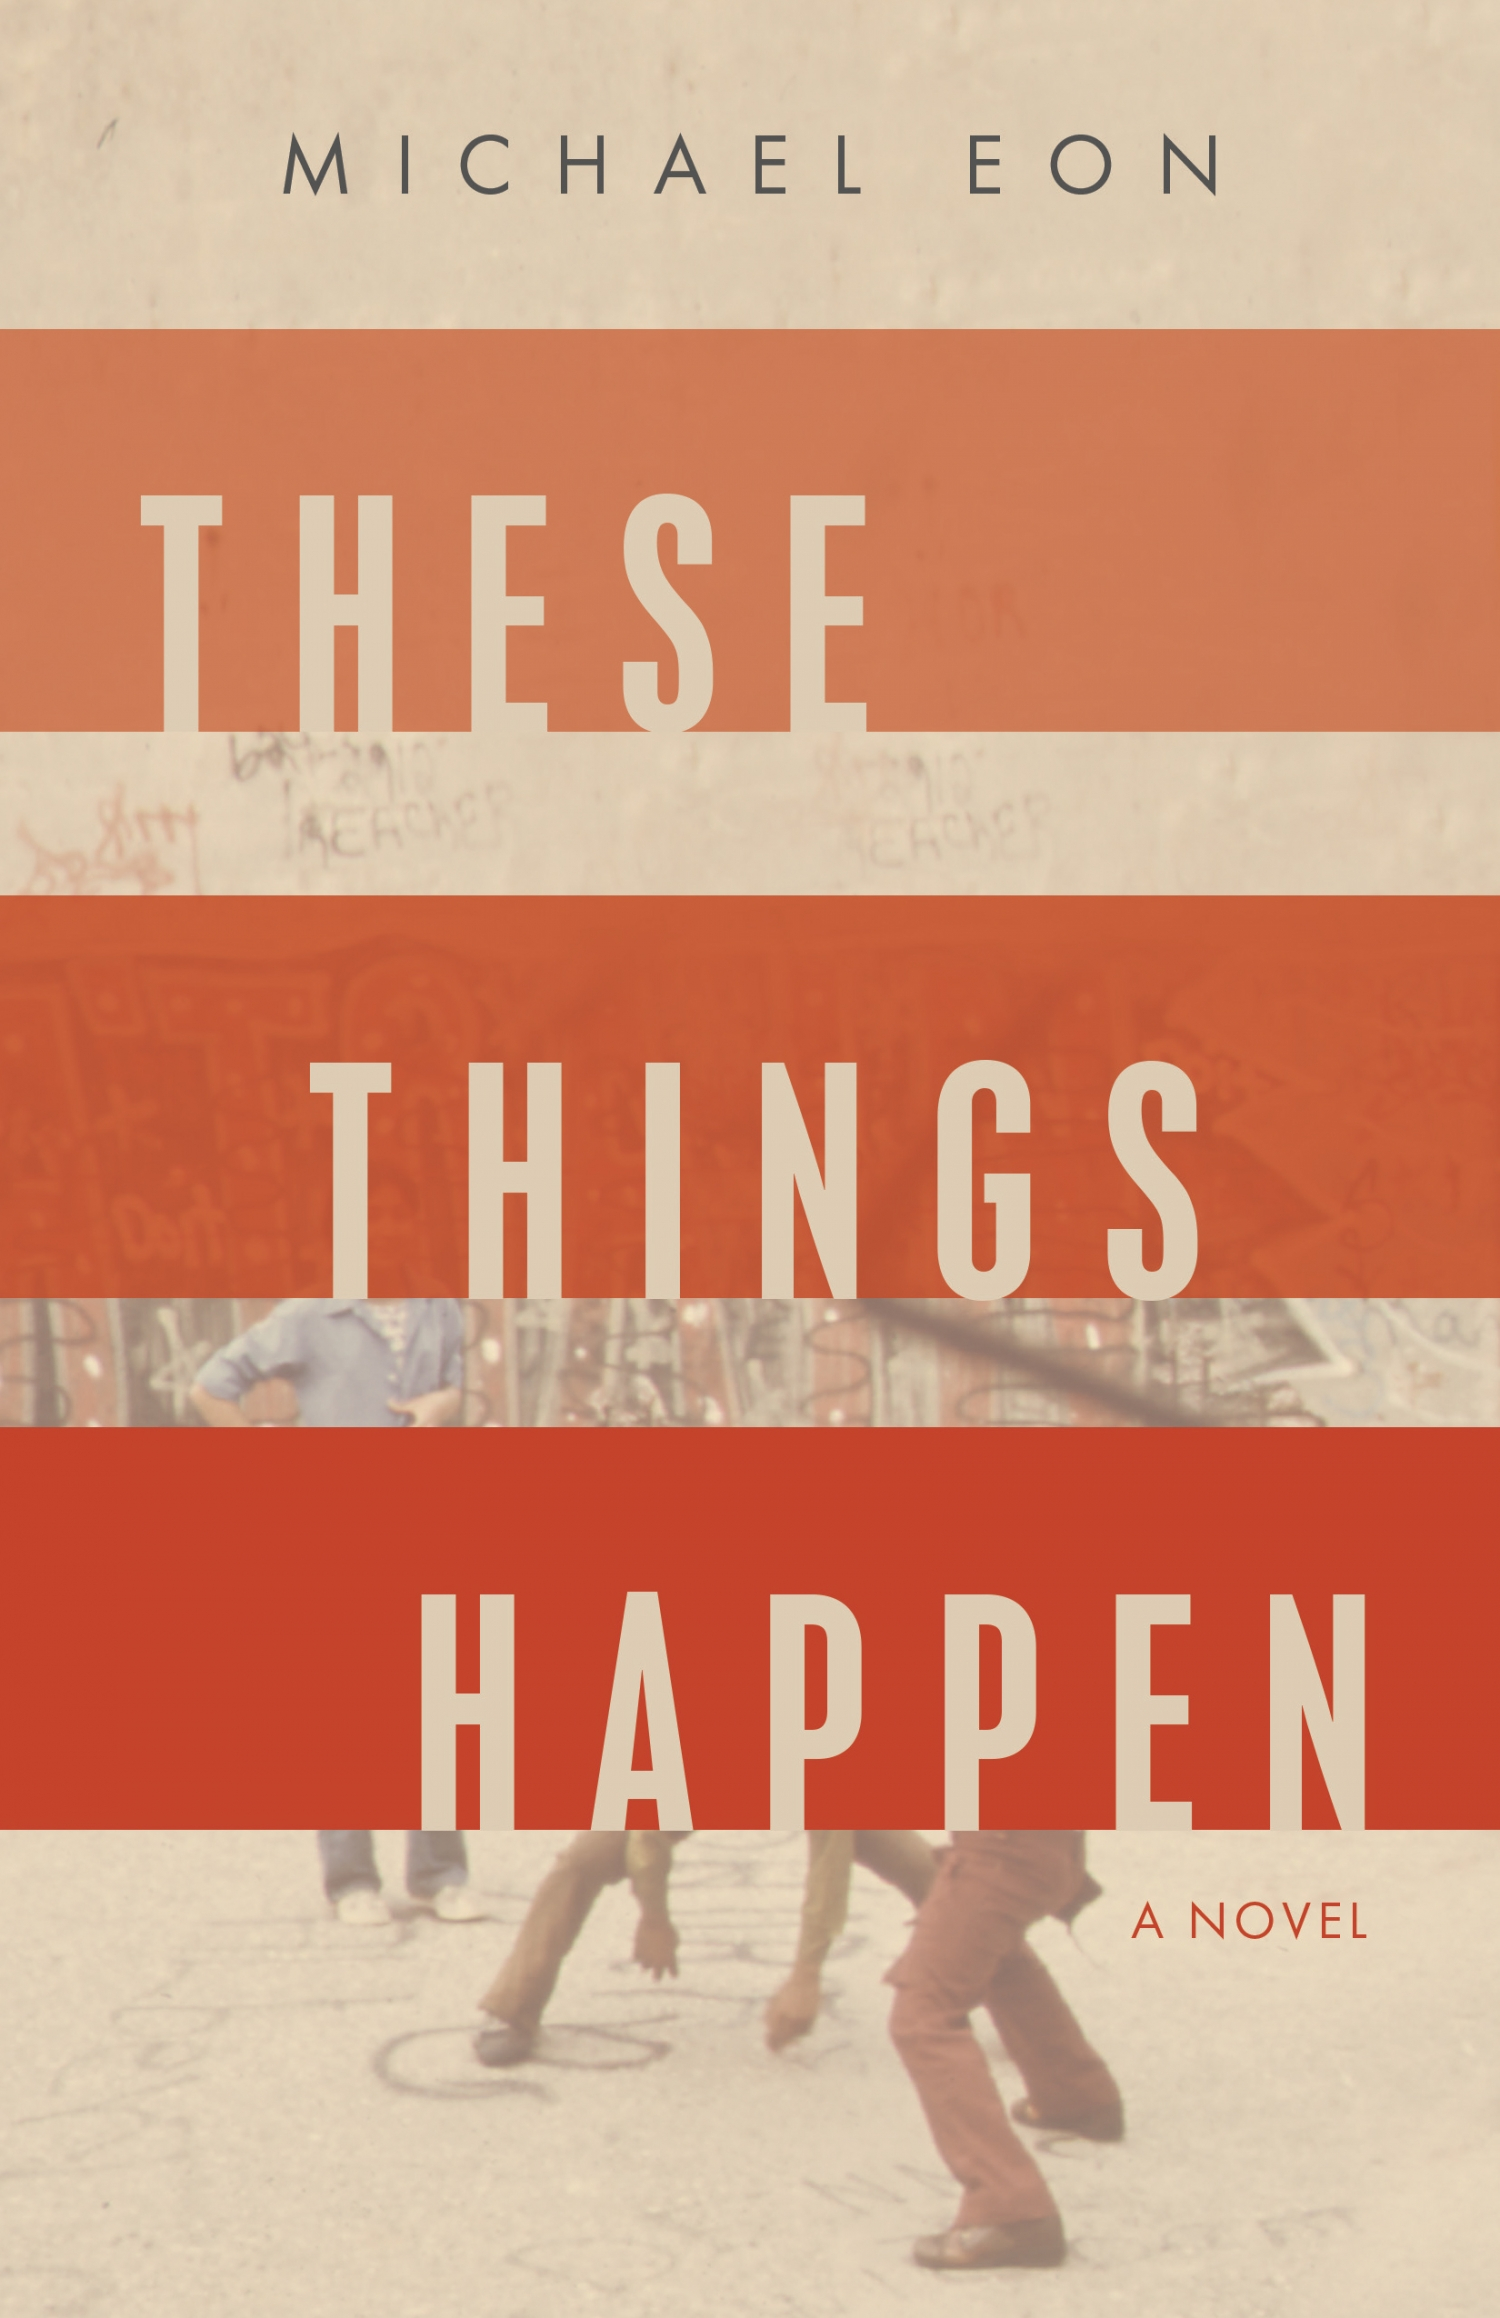 These Things Happen by Michael Eon